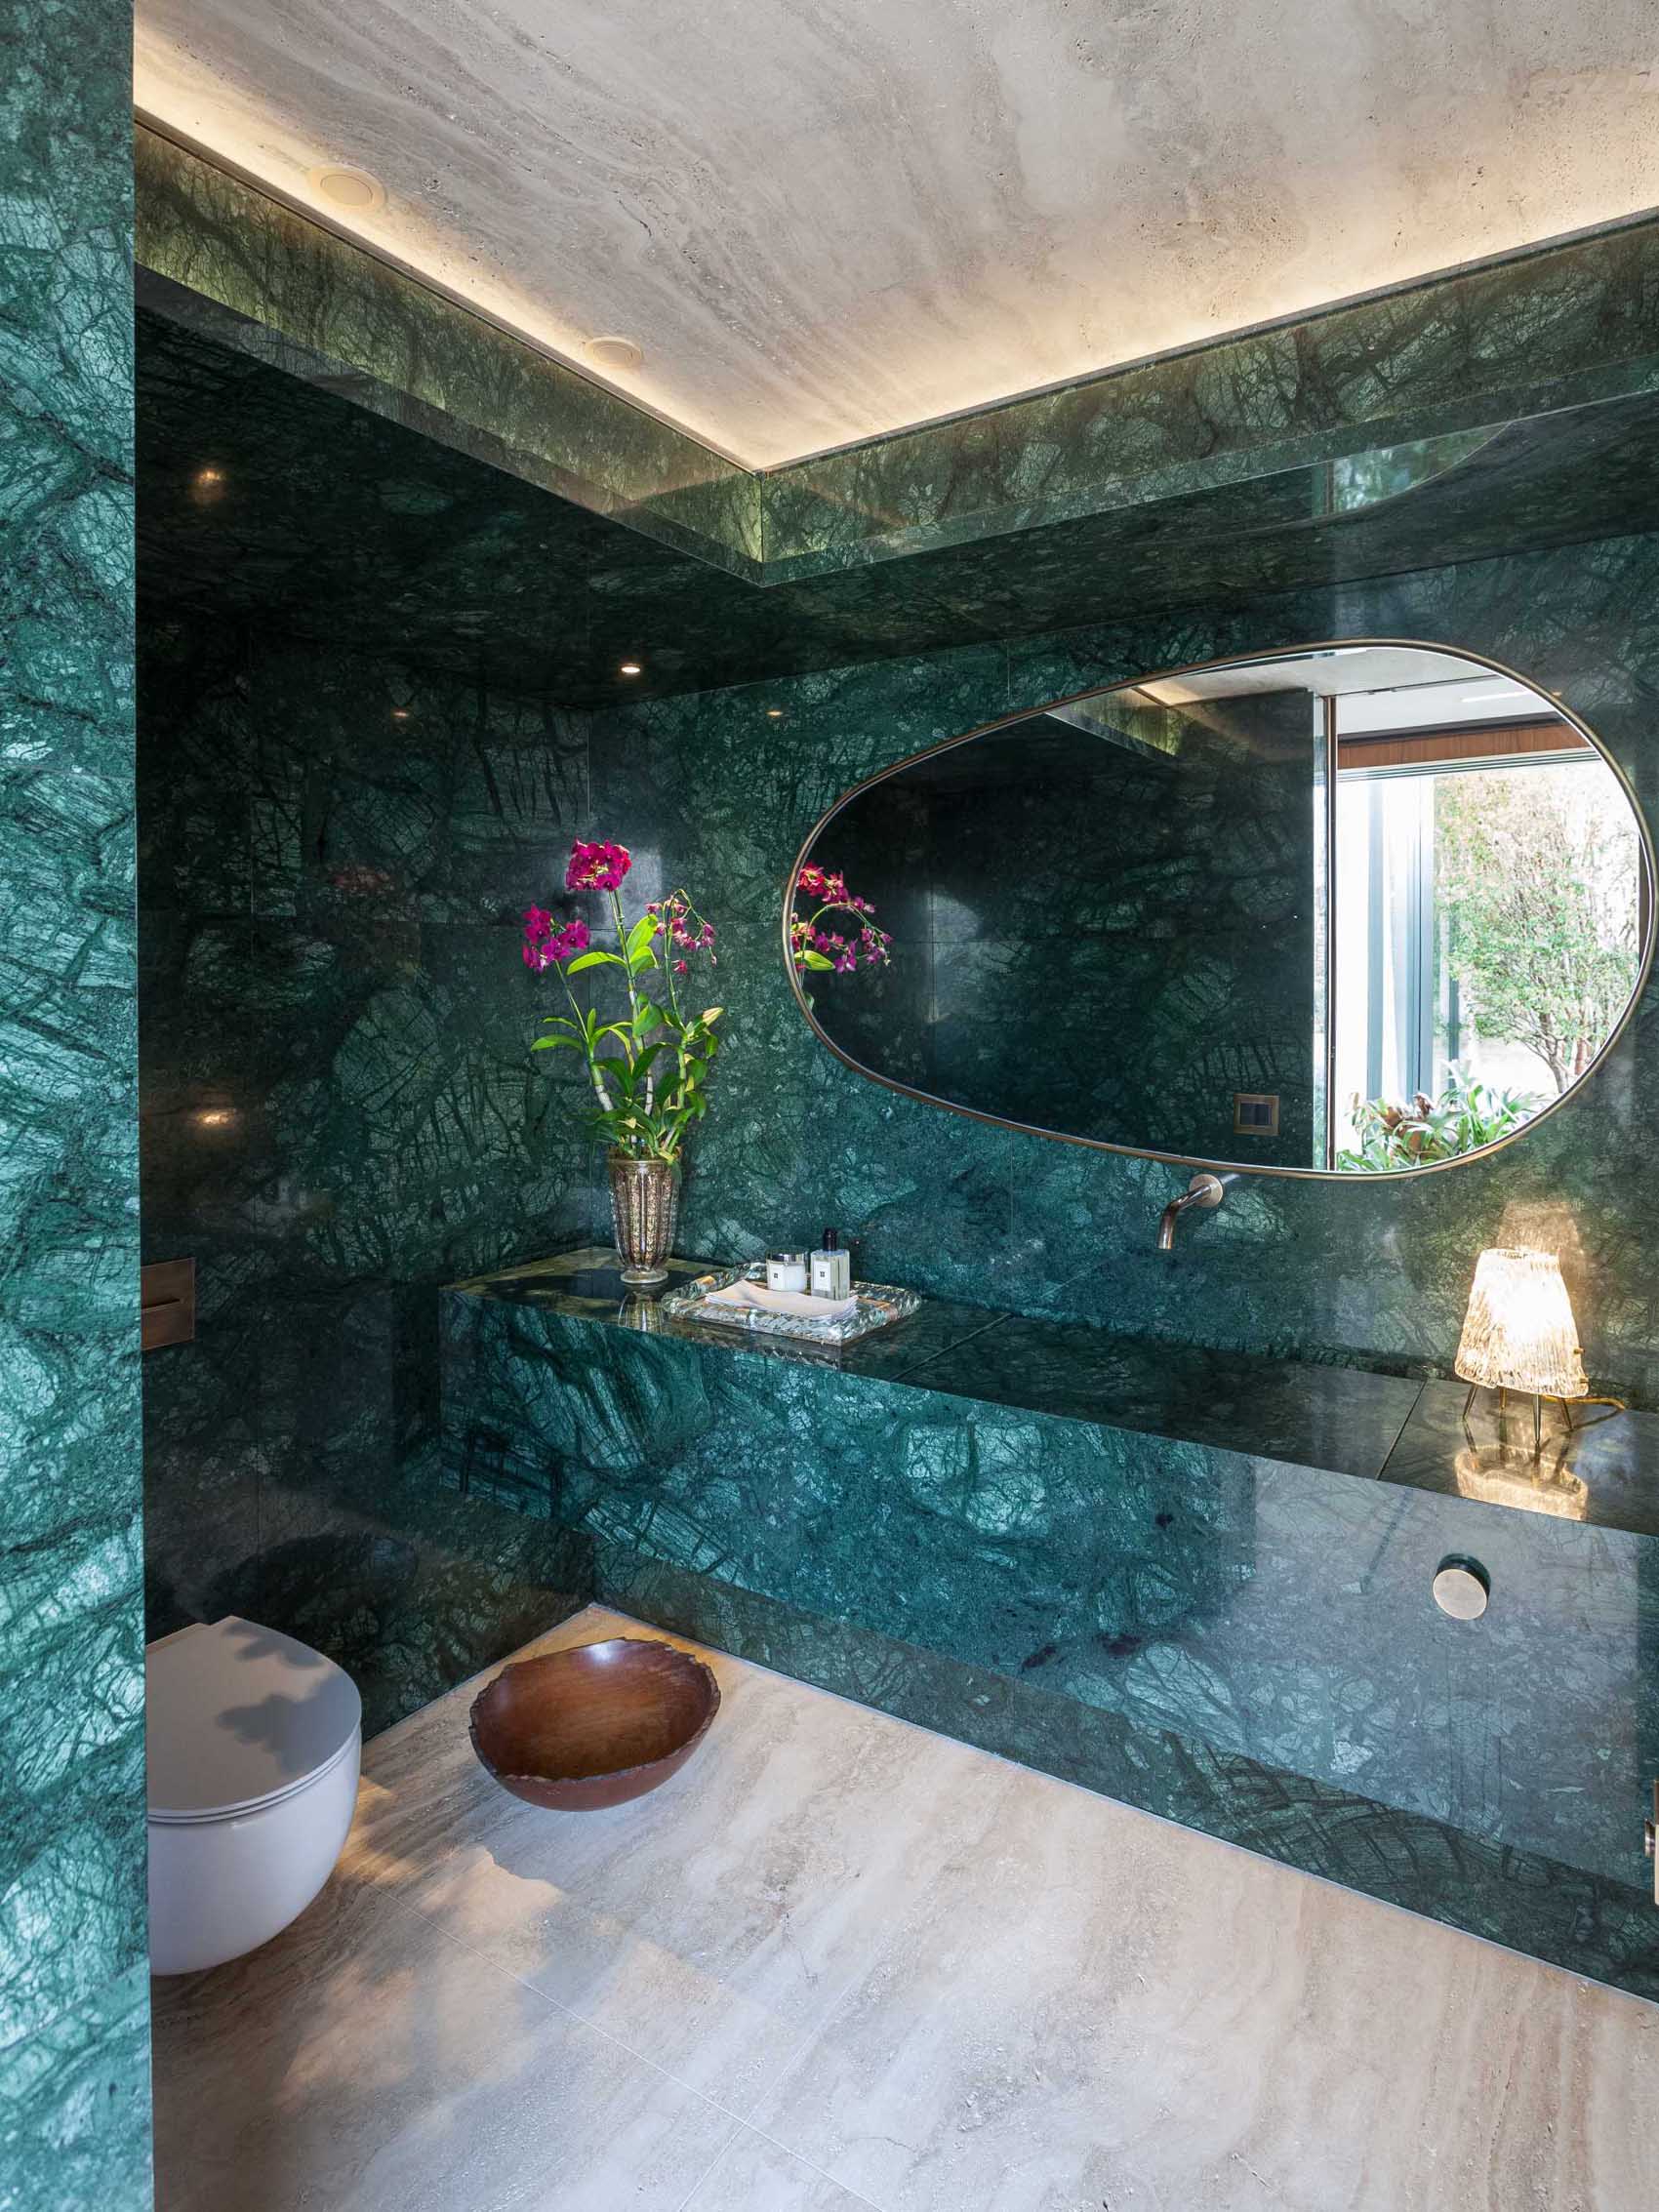 In this bathroom, a Guatemalan green marble was used to line the walls and vanity.